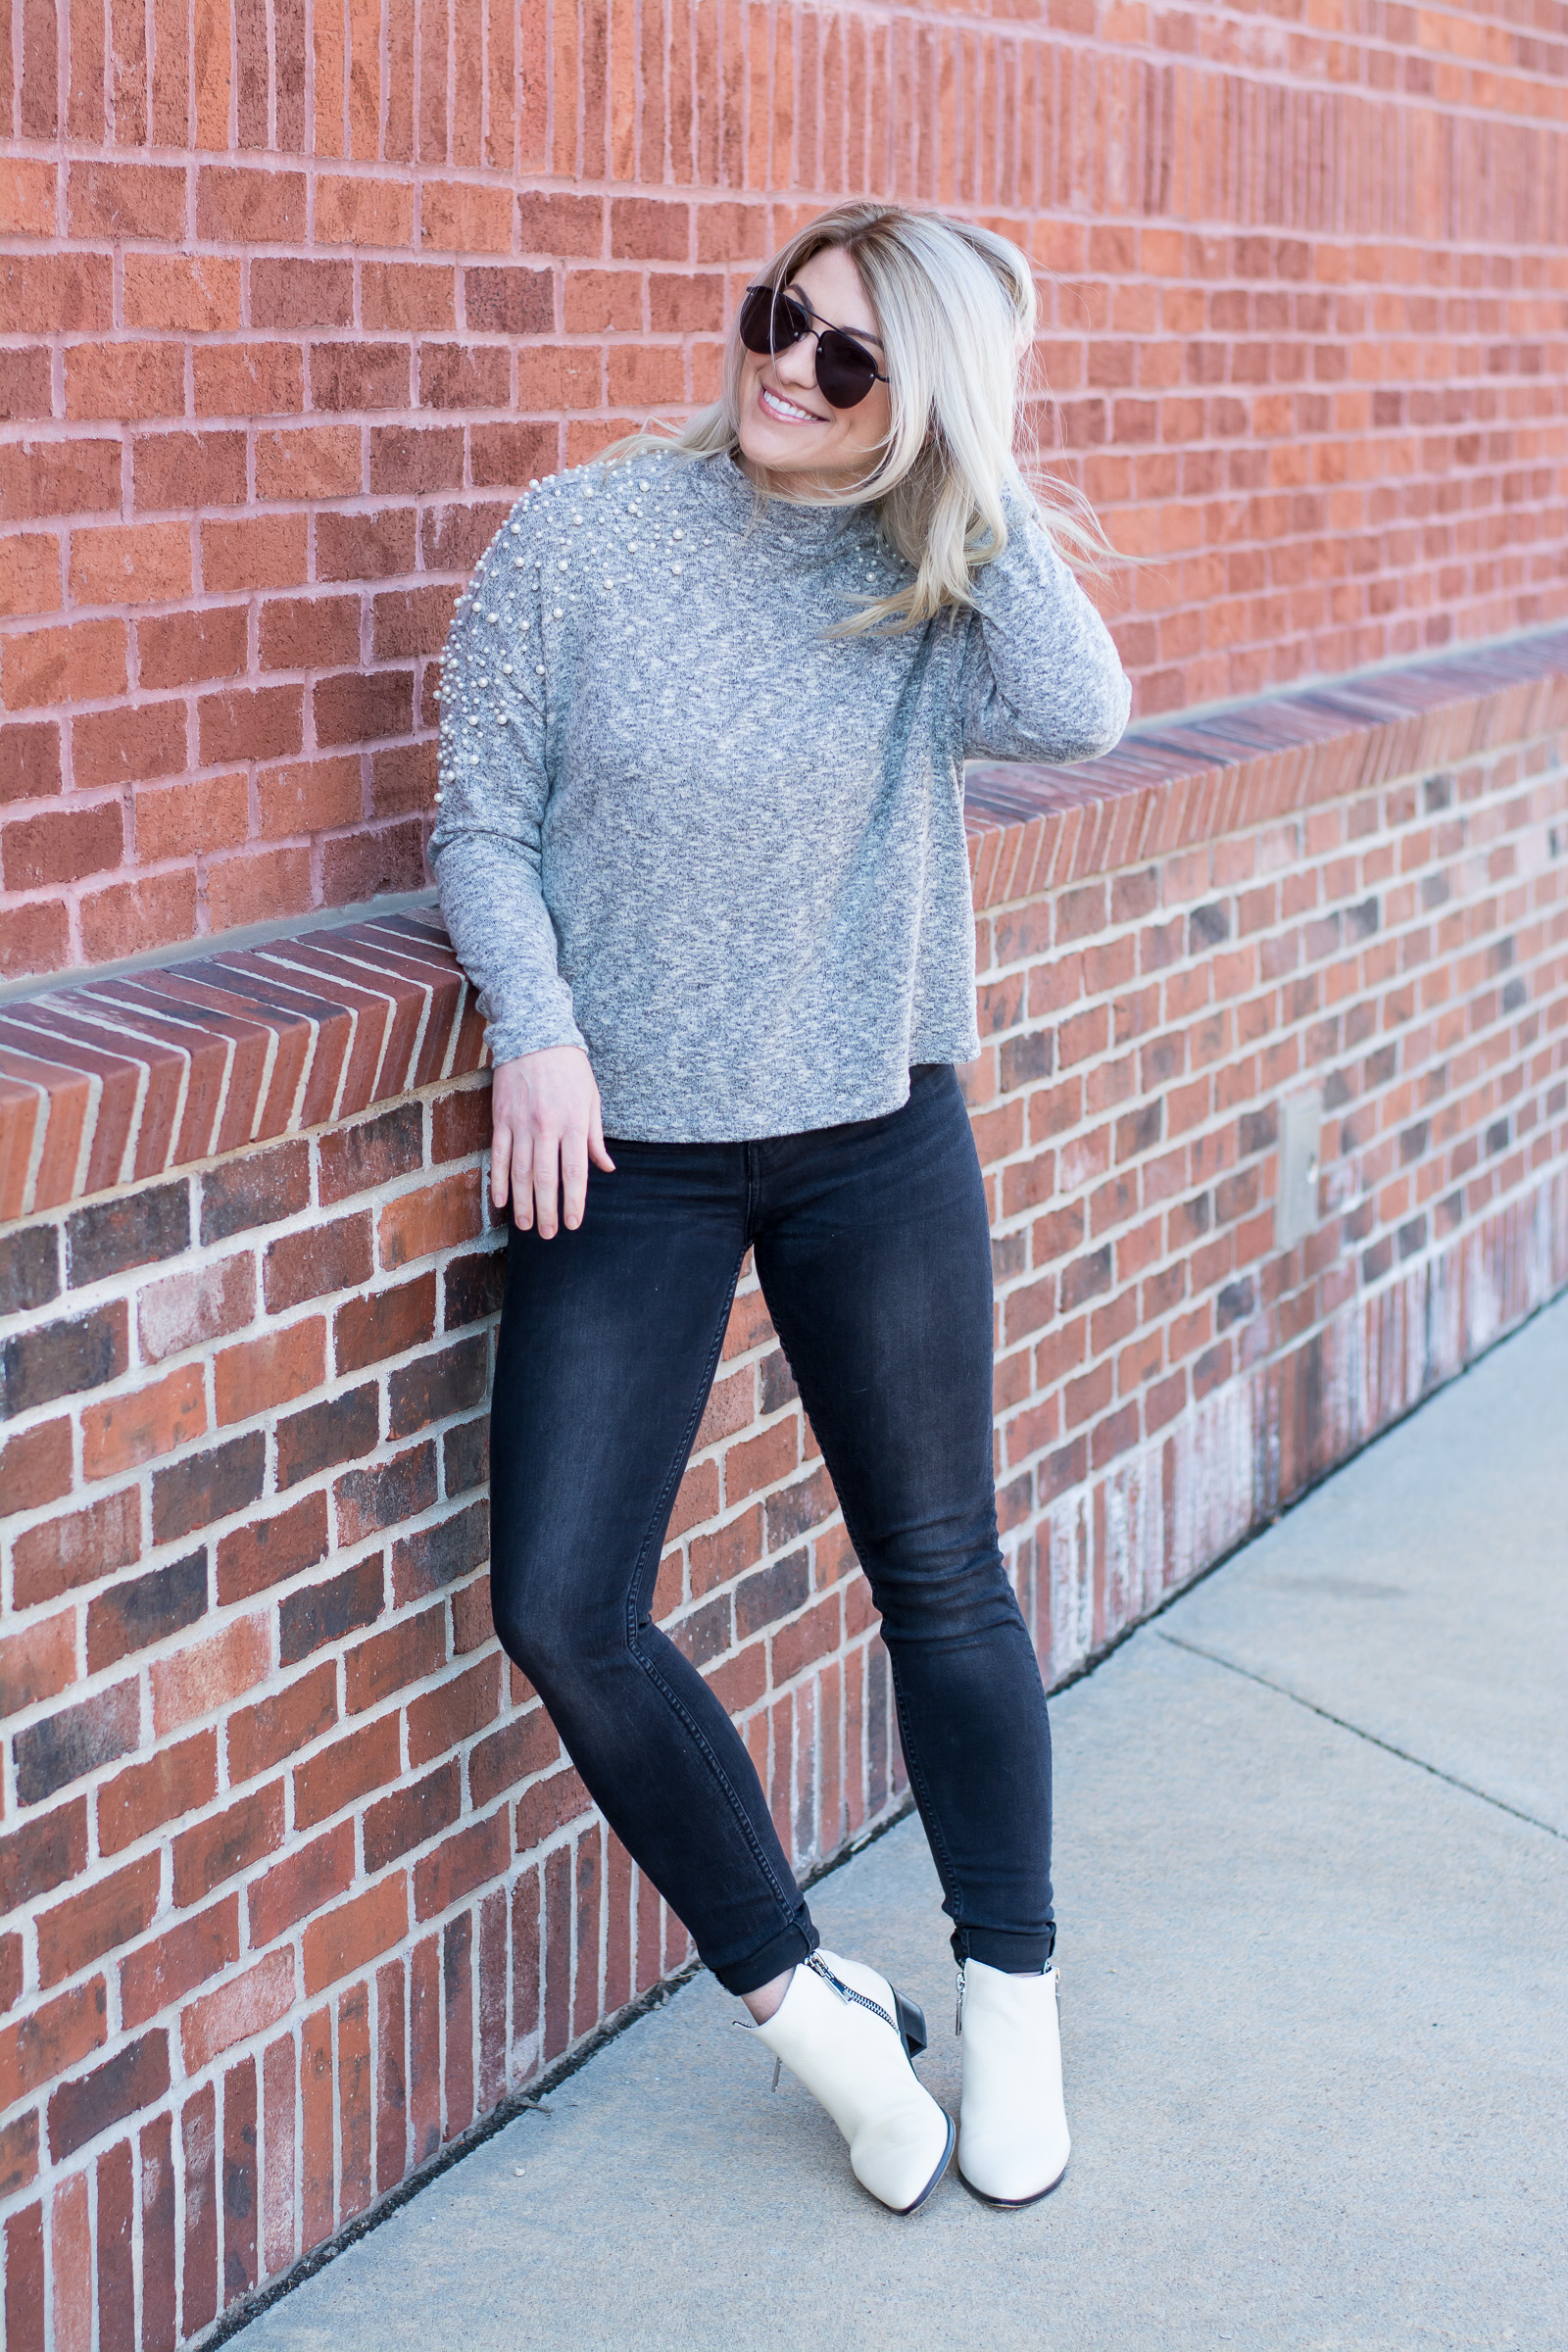 Pearl Sweater with Dark Denim + White Booties. | Le Stylo Rouge